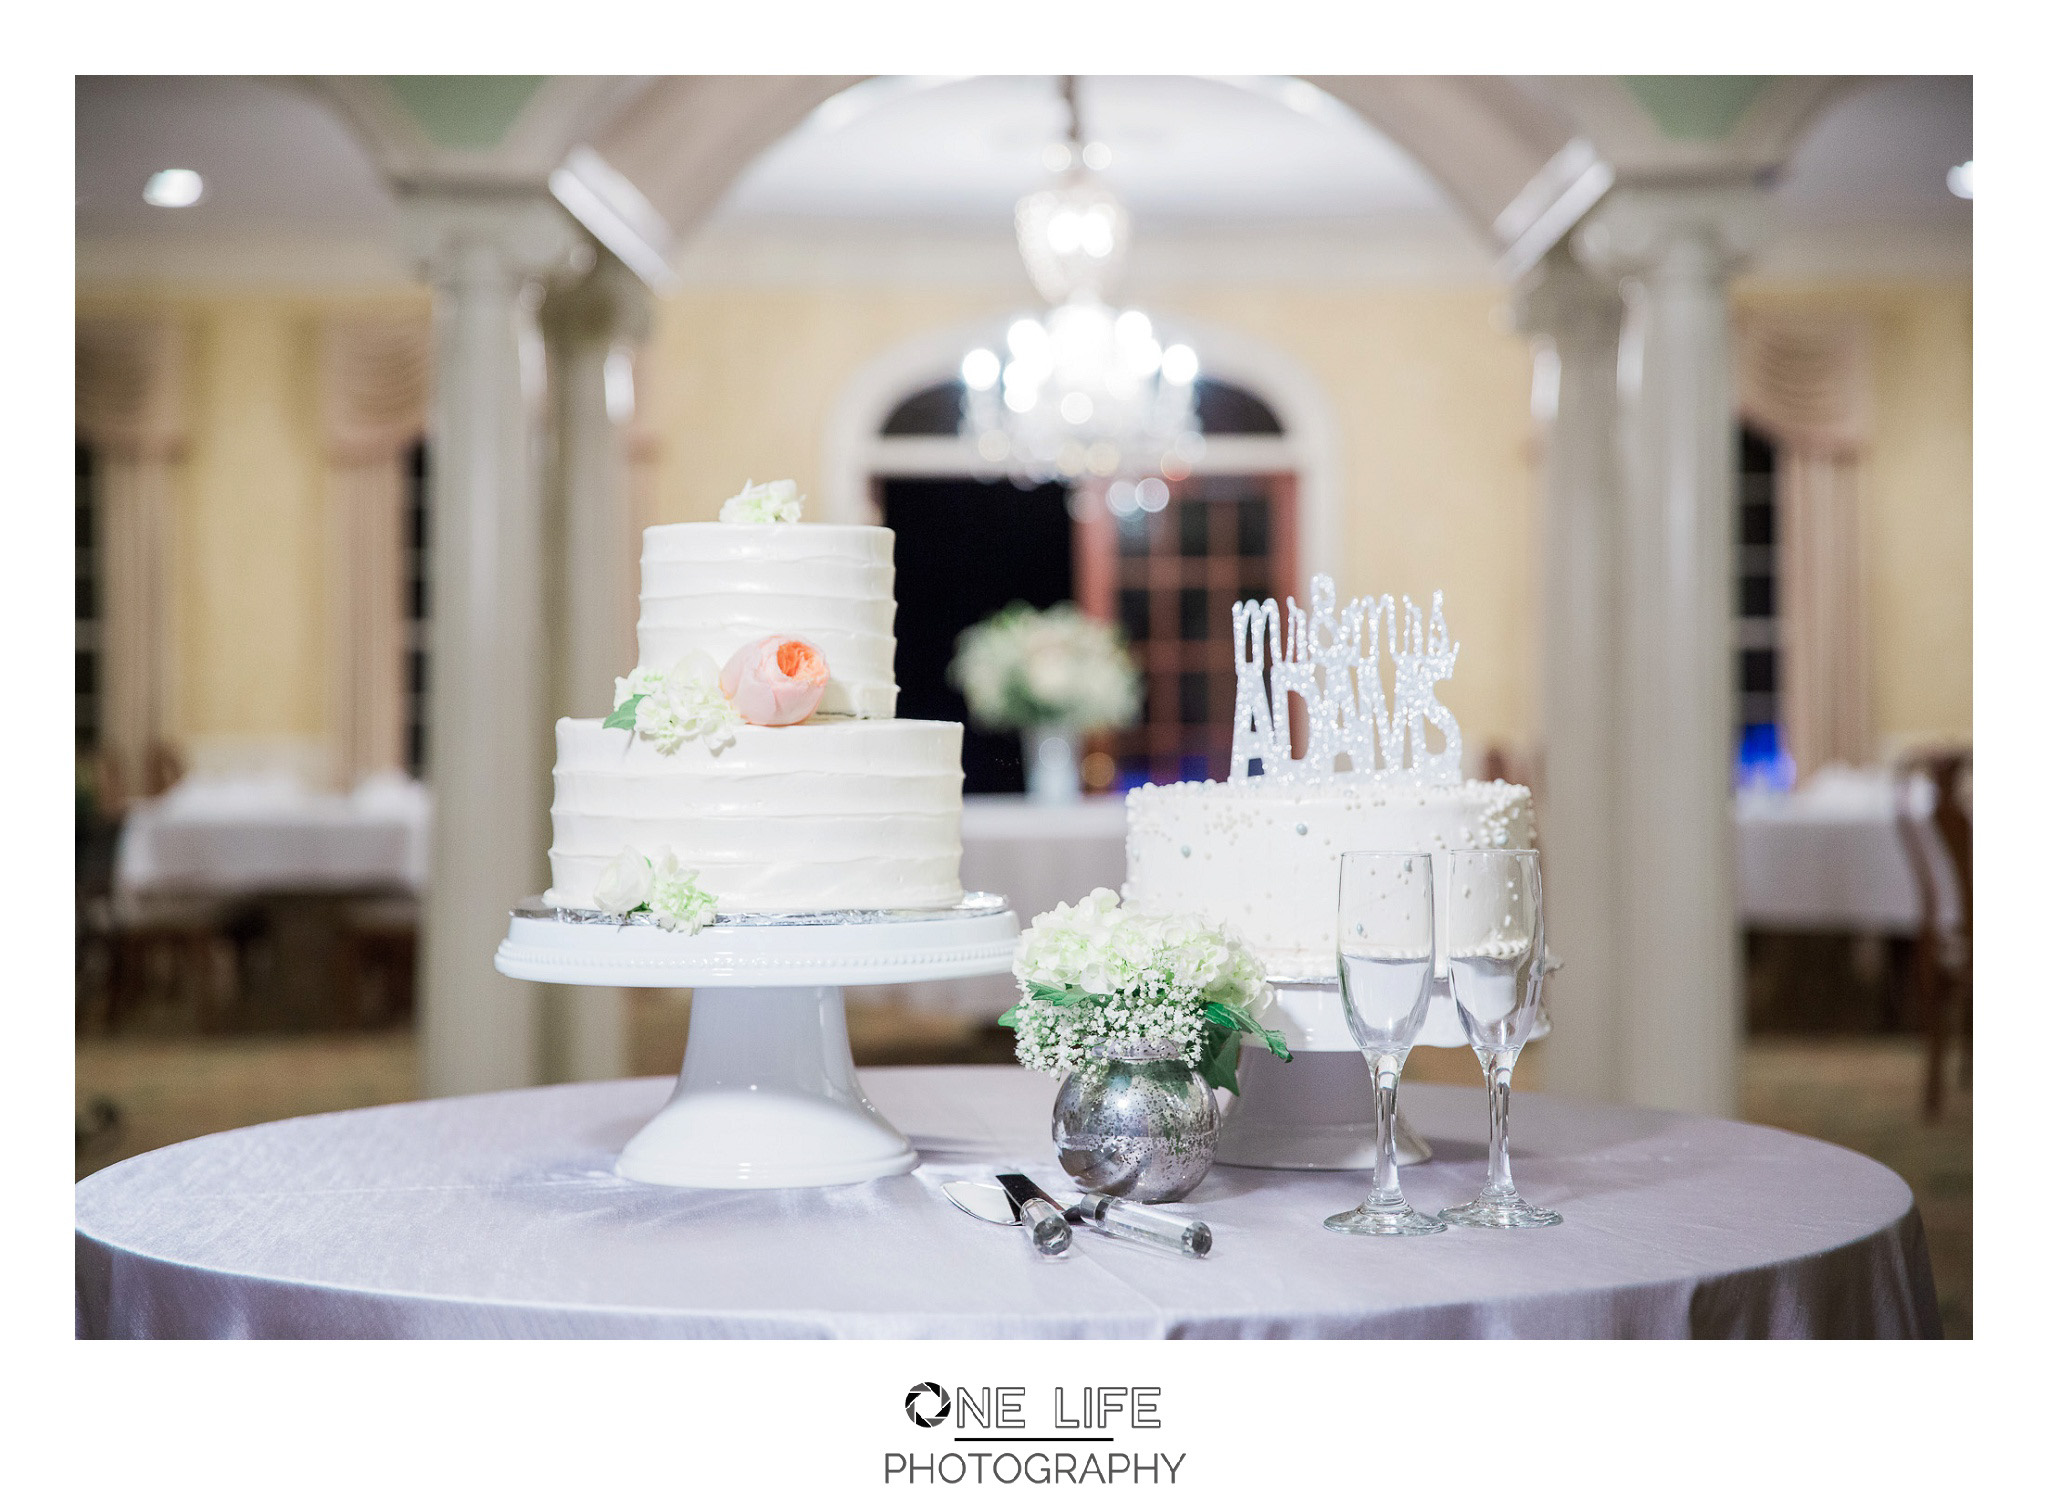 The Perfect Cake II - by Buttercream Cakes and Catering, Kay and Josh's wedding at the Heritage Plantation, Pawleys Island, South Carolina on September 19, 2015 Heritage Plantation Southern wedding, Pawleys Island, South Carolina Venue and Catering: Heritage Club, Pawleys Island Music: Paul Matthews Entertainment Brides dress: The Little White Dress Cake: Buttercream Cakes and Catering Event Rentals: Eventworks Photographer: One Life Photography